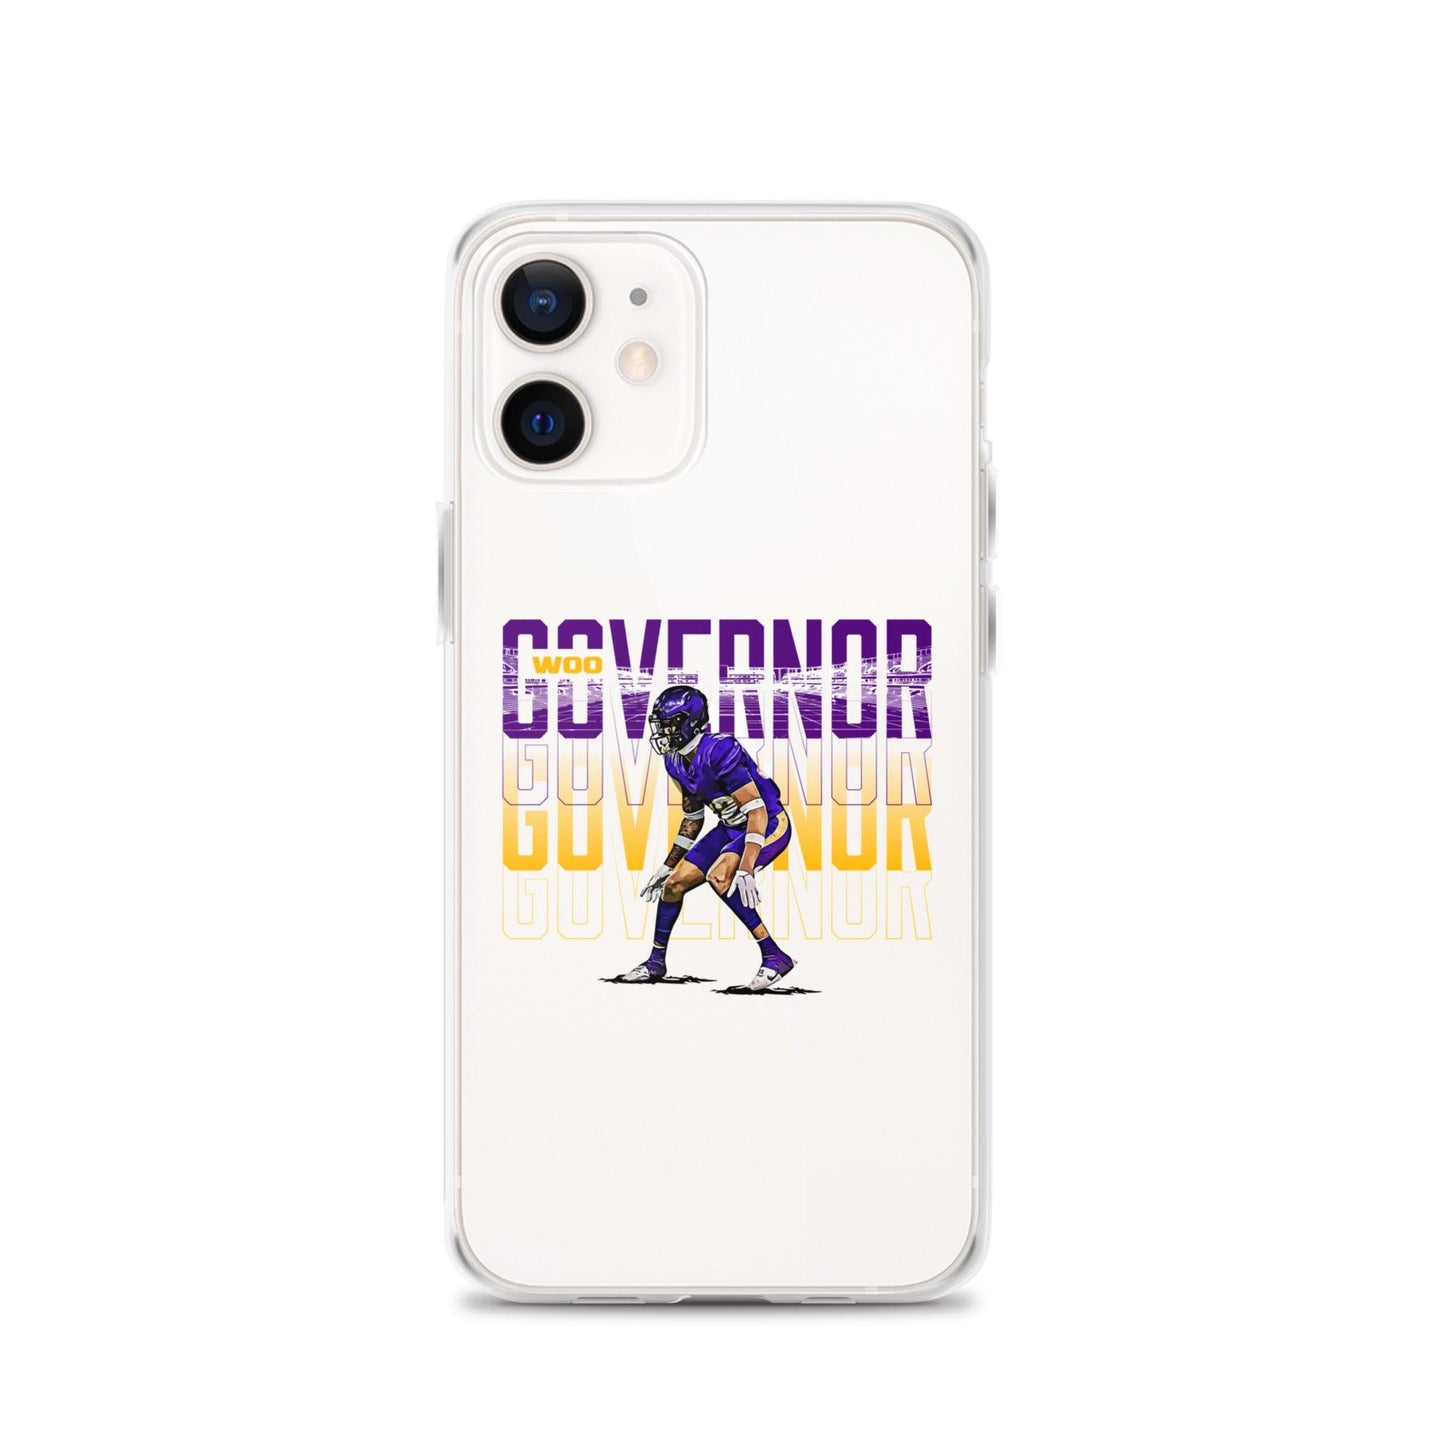 Woo Governor "Gameday" iPhone Case - Fan Arch